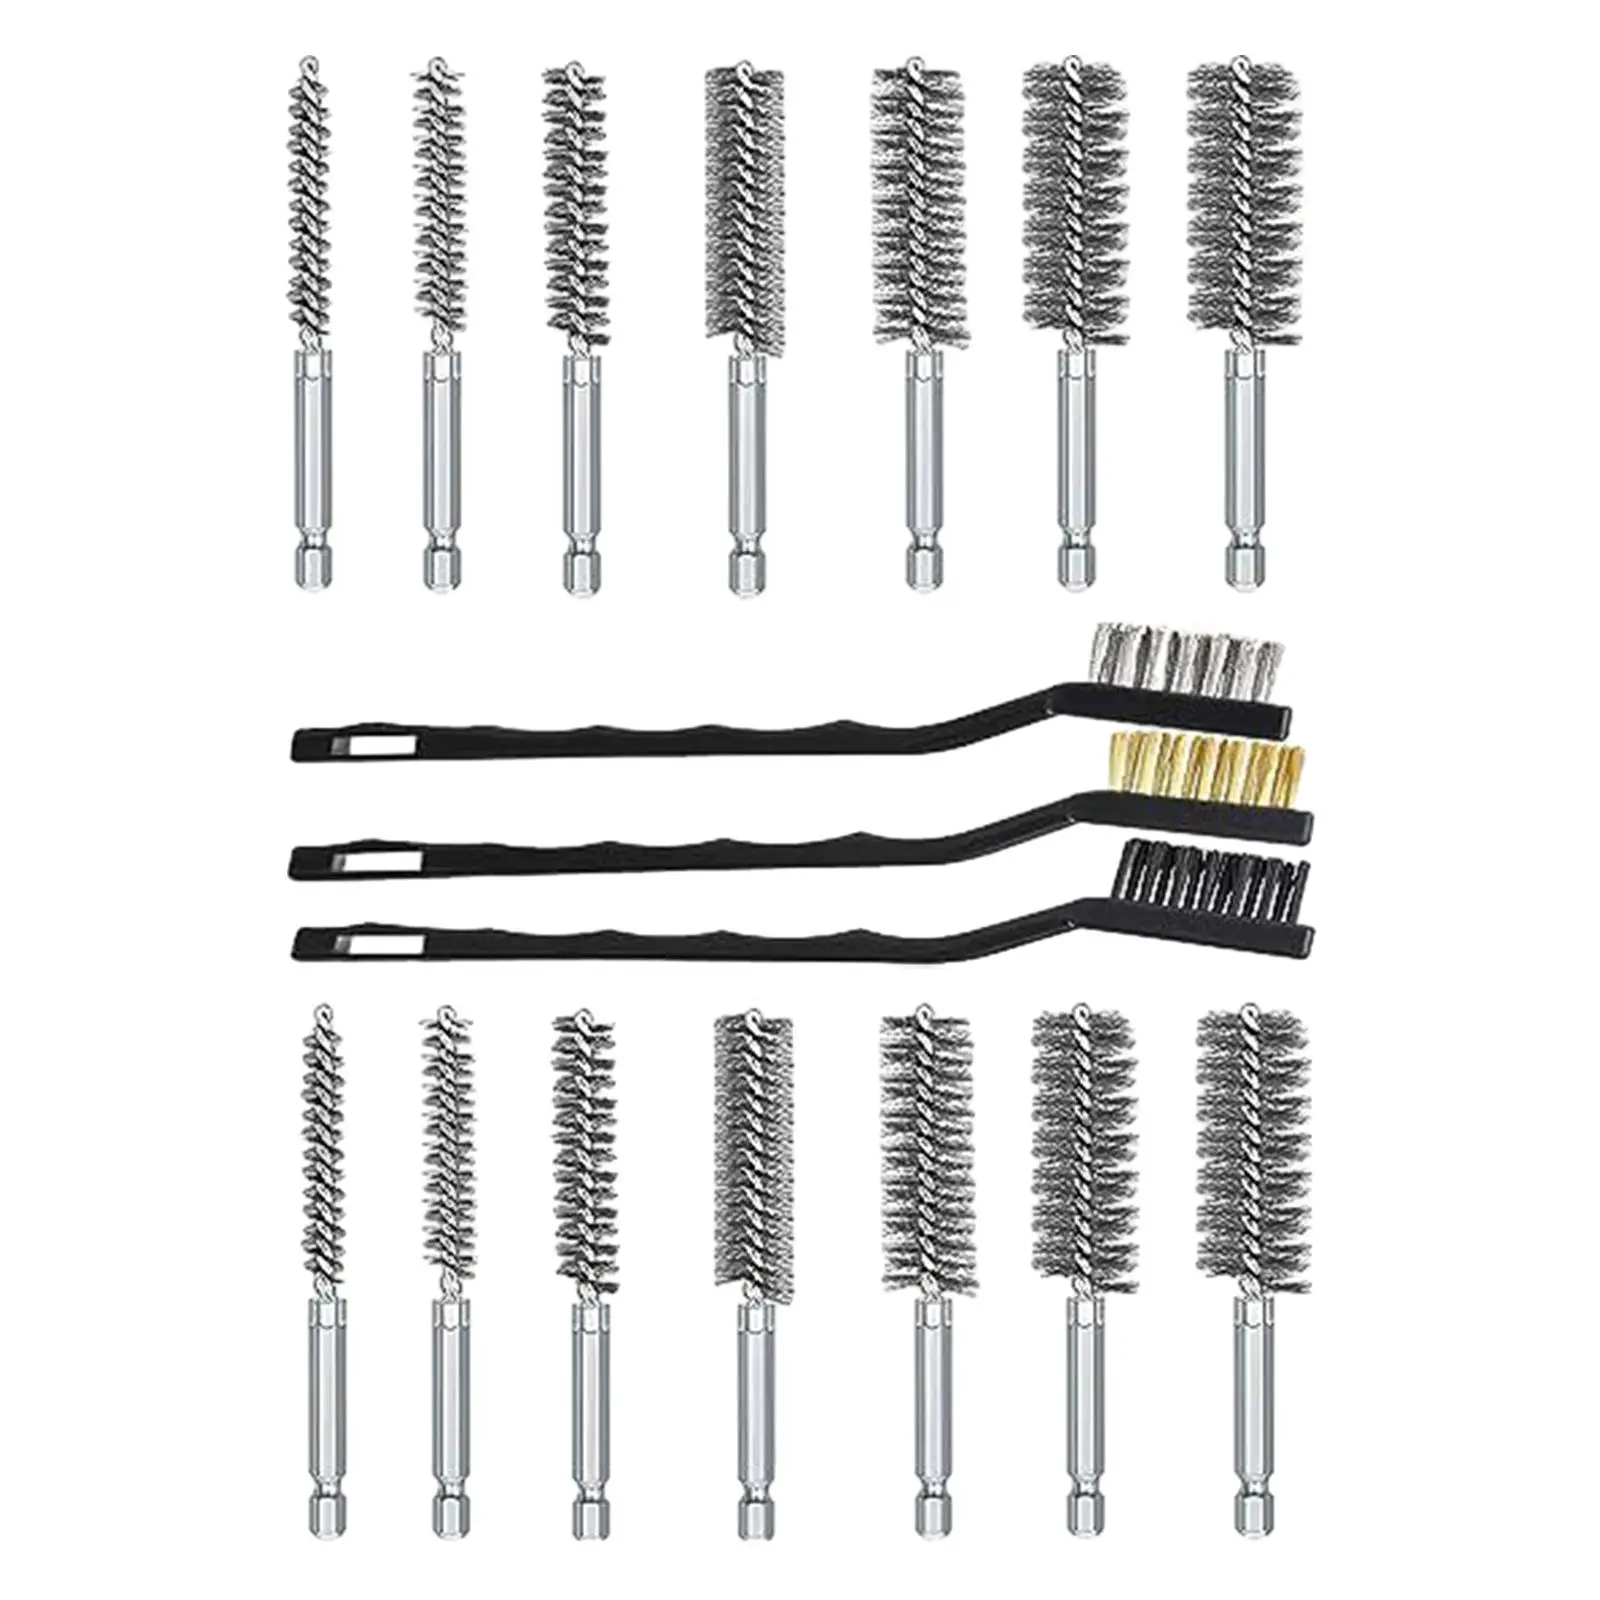 Bore Brush Set Accessories Sturdy 8mm-25mm with Handle Bore Cleaning Brushes